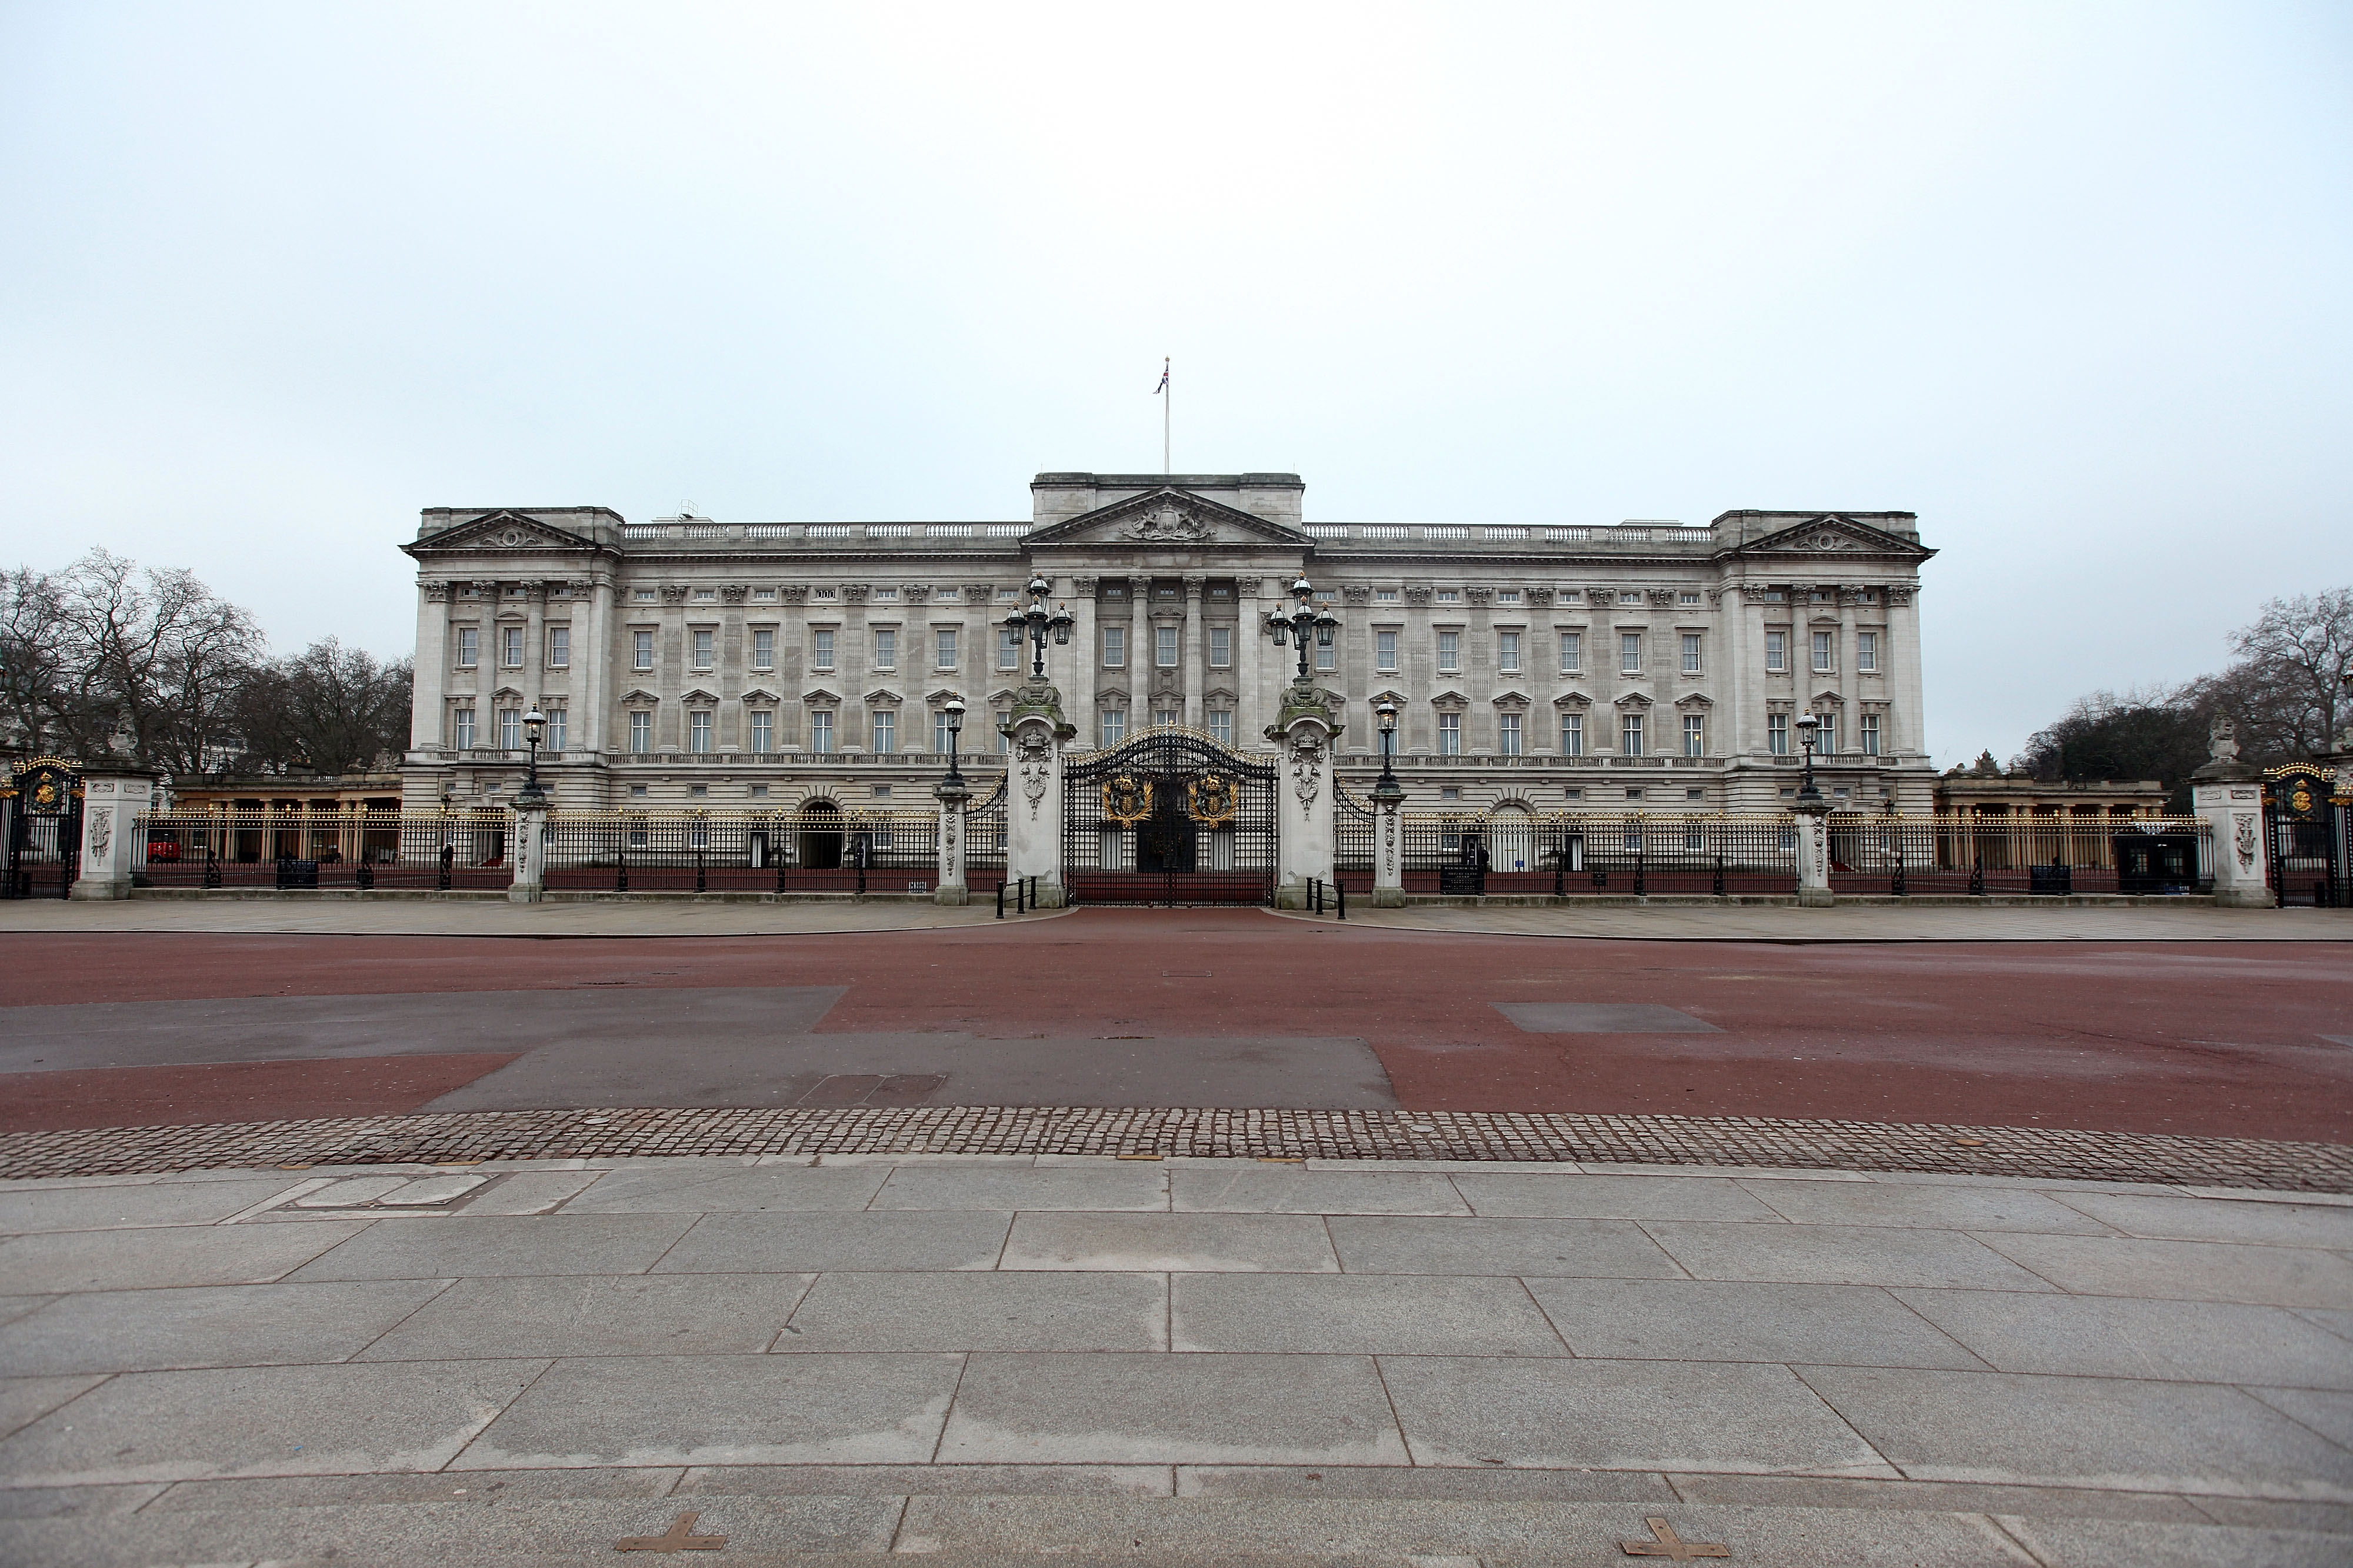 General view of the front of Buckingham Palace